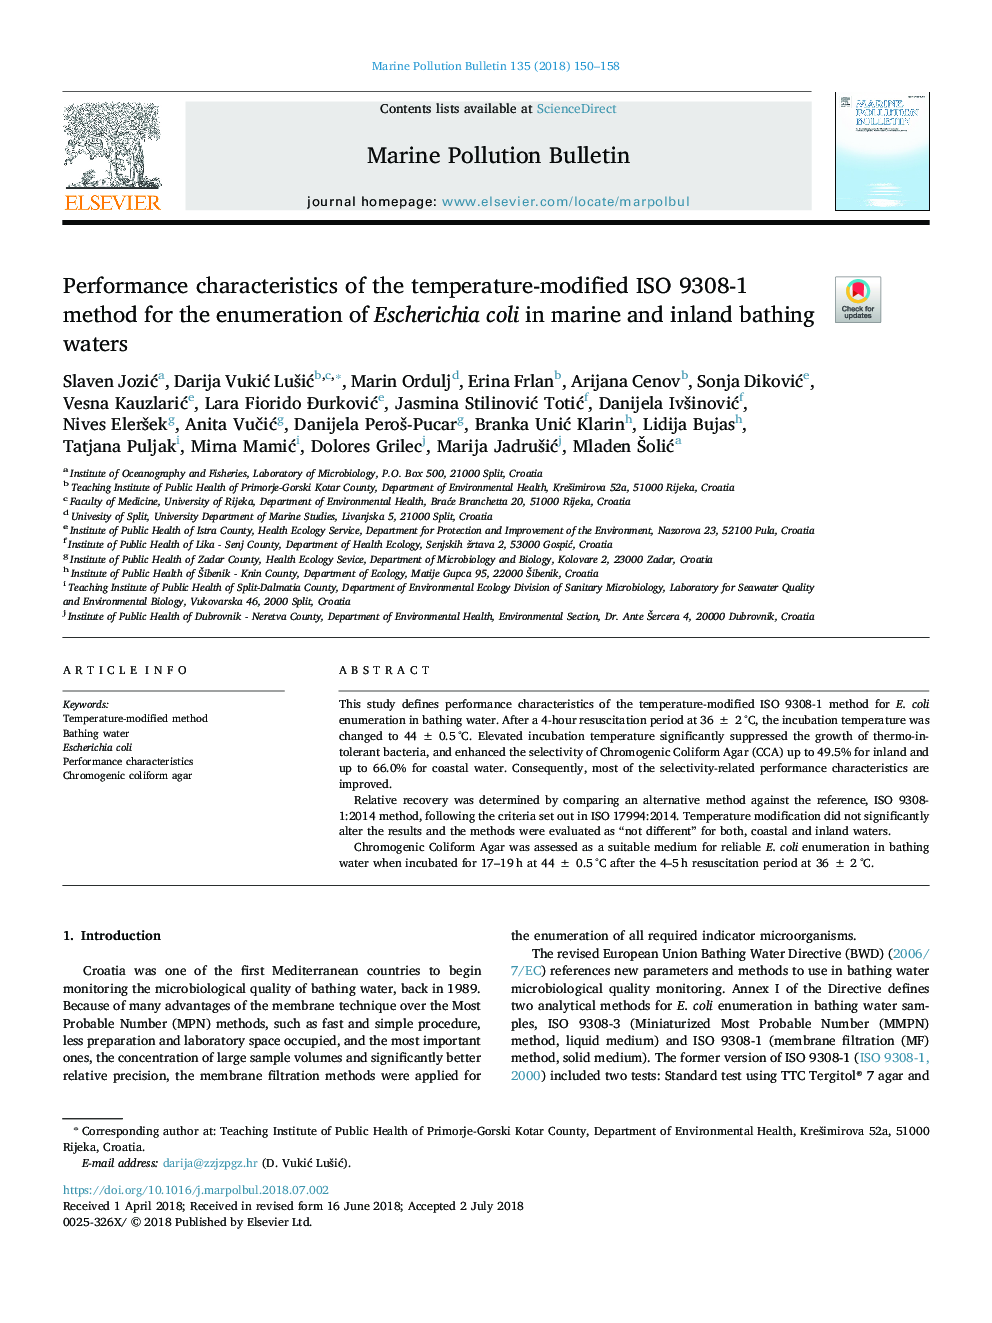 Performance characteristics of the temperature-modified ISO 9308-1 method for the enumeration of Escherichia coli in marine and inland bathing waters